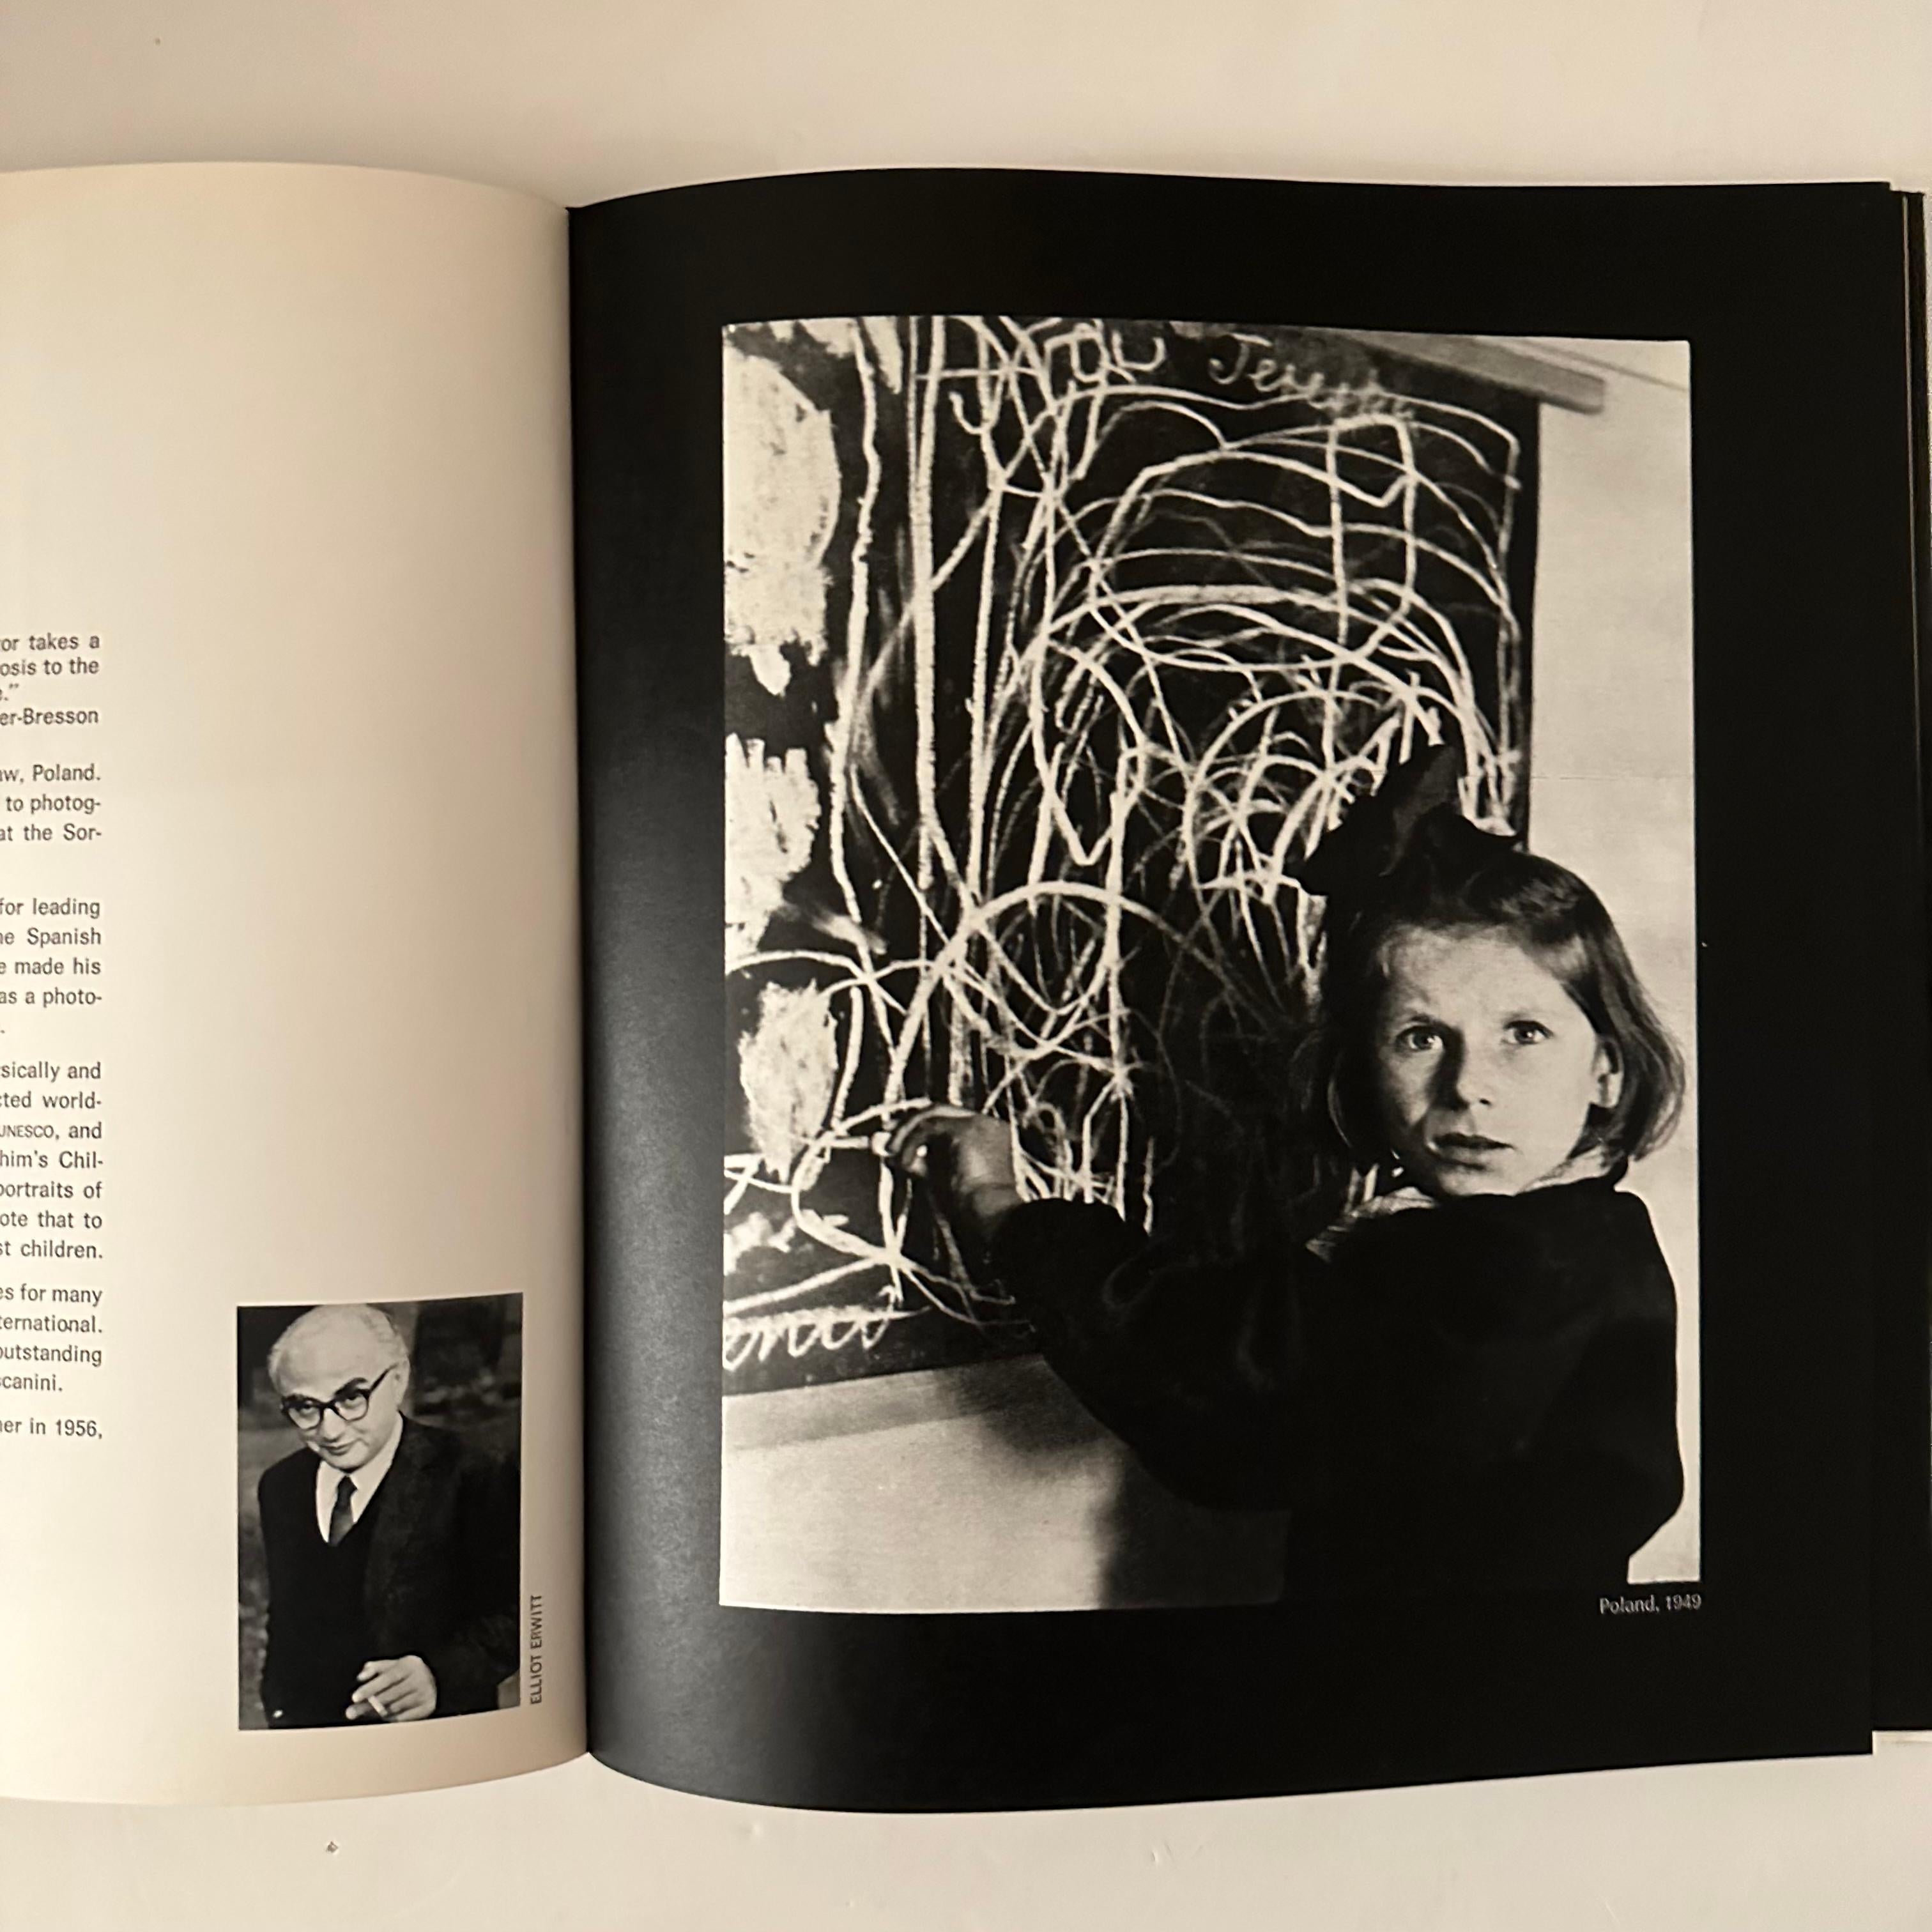 Published by Grossman Publishers, 1st edition, 1968. Hardback, English text.

This magnificent volume is based on the exhibition “The Concerned Photographer”, held at the Riverside Museum, New York in 1967. This monumental exhibition was then